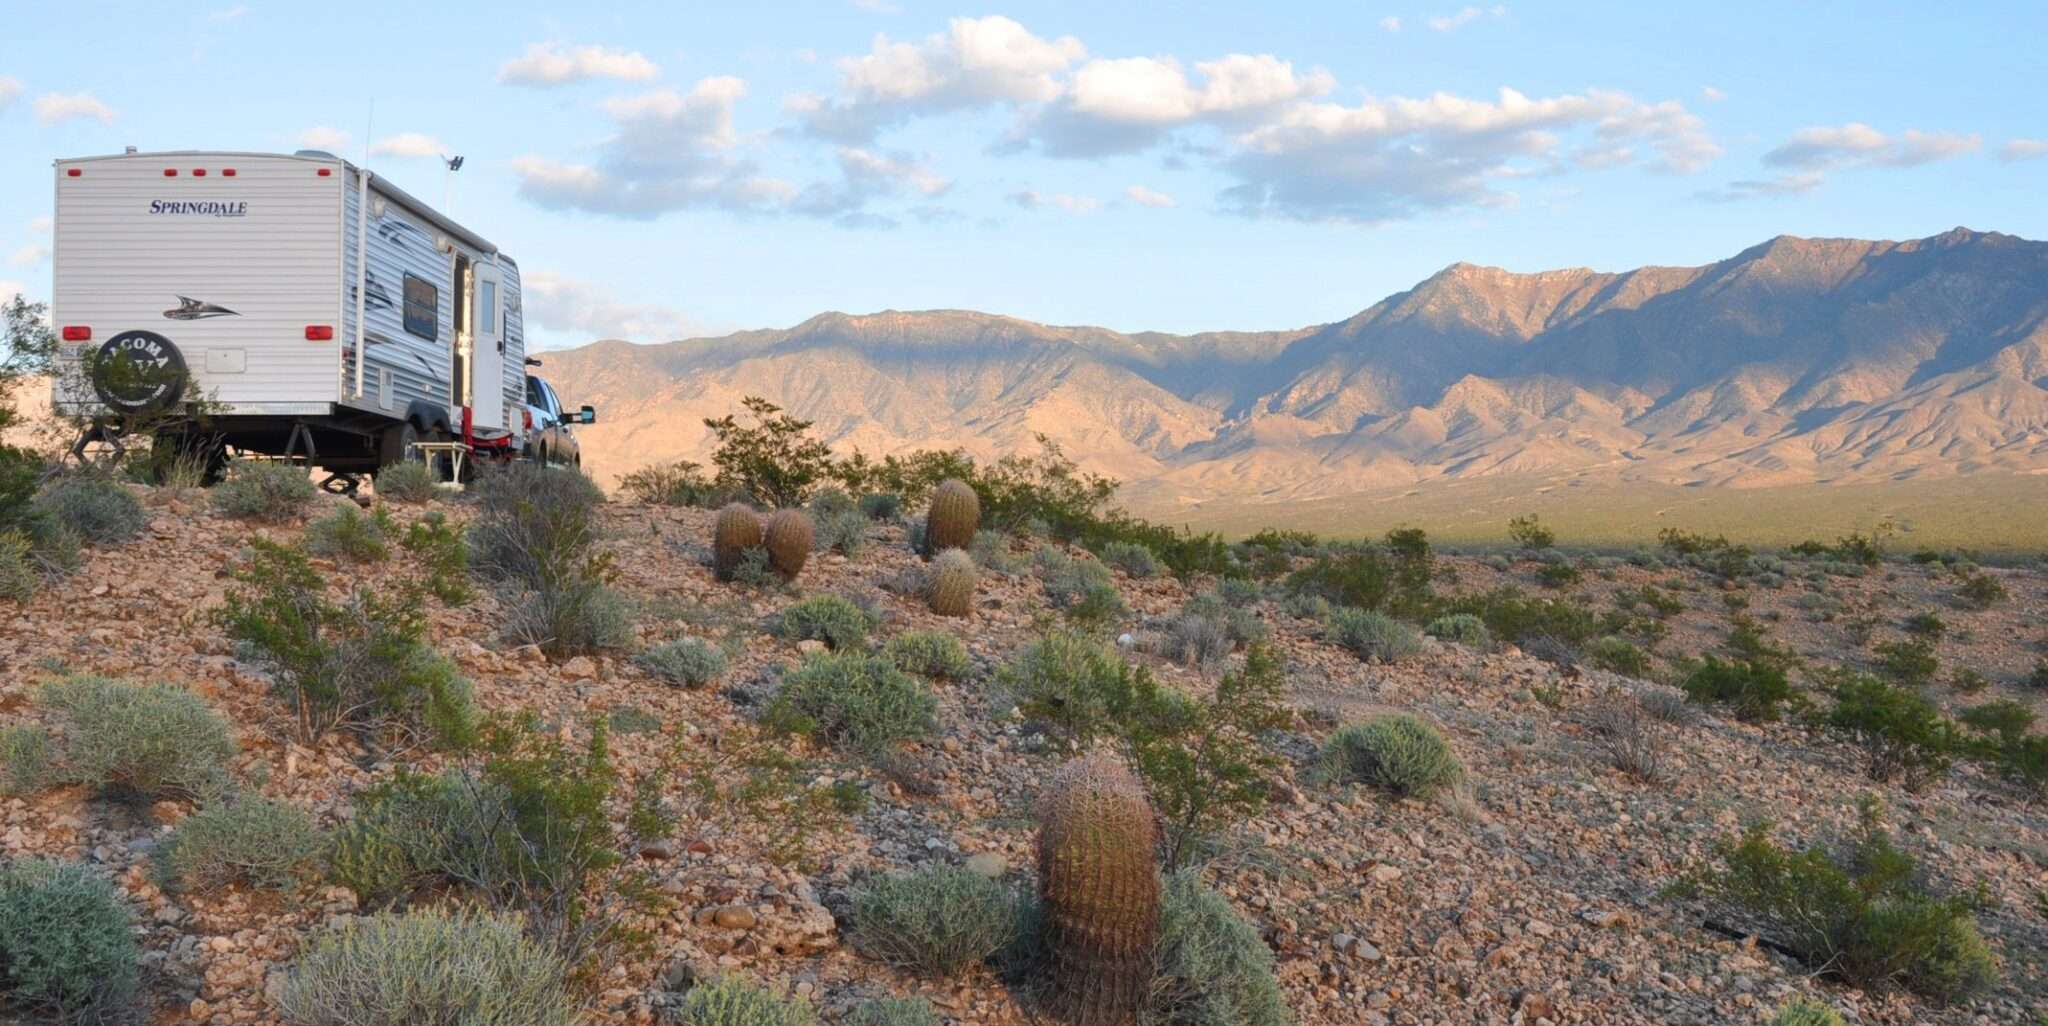 How To Find Dispersed Camping In Arizona